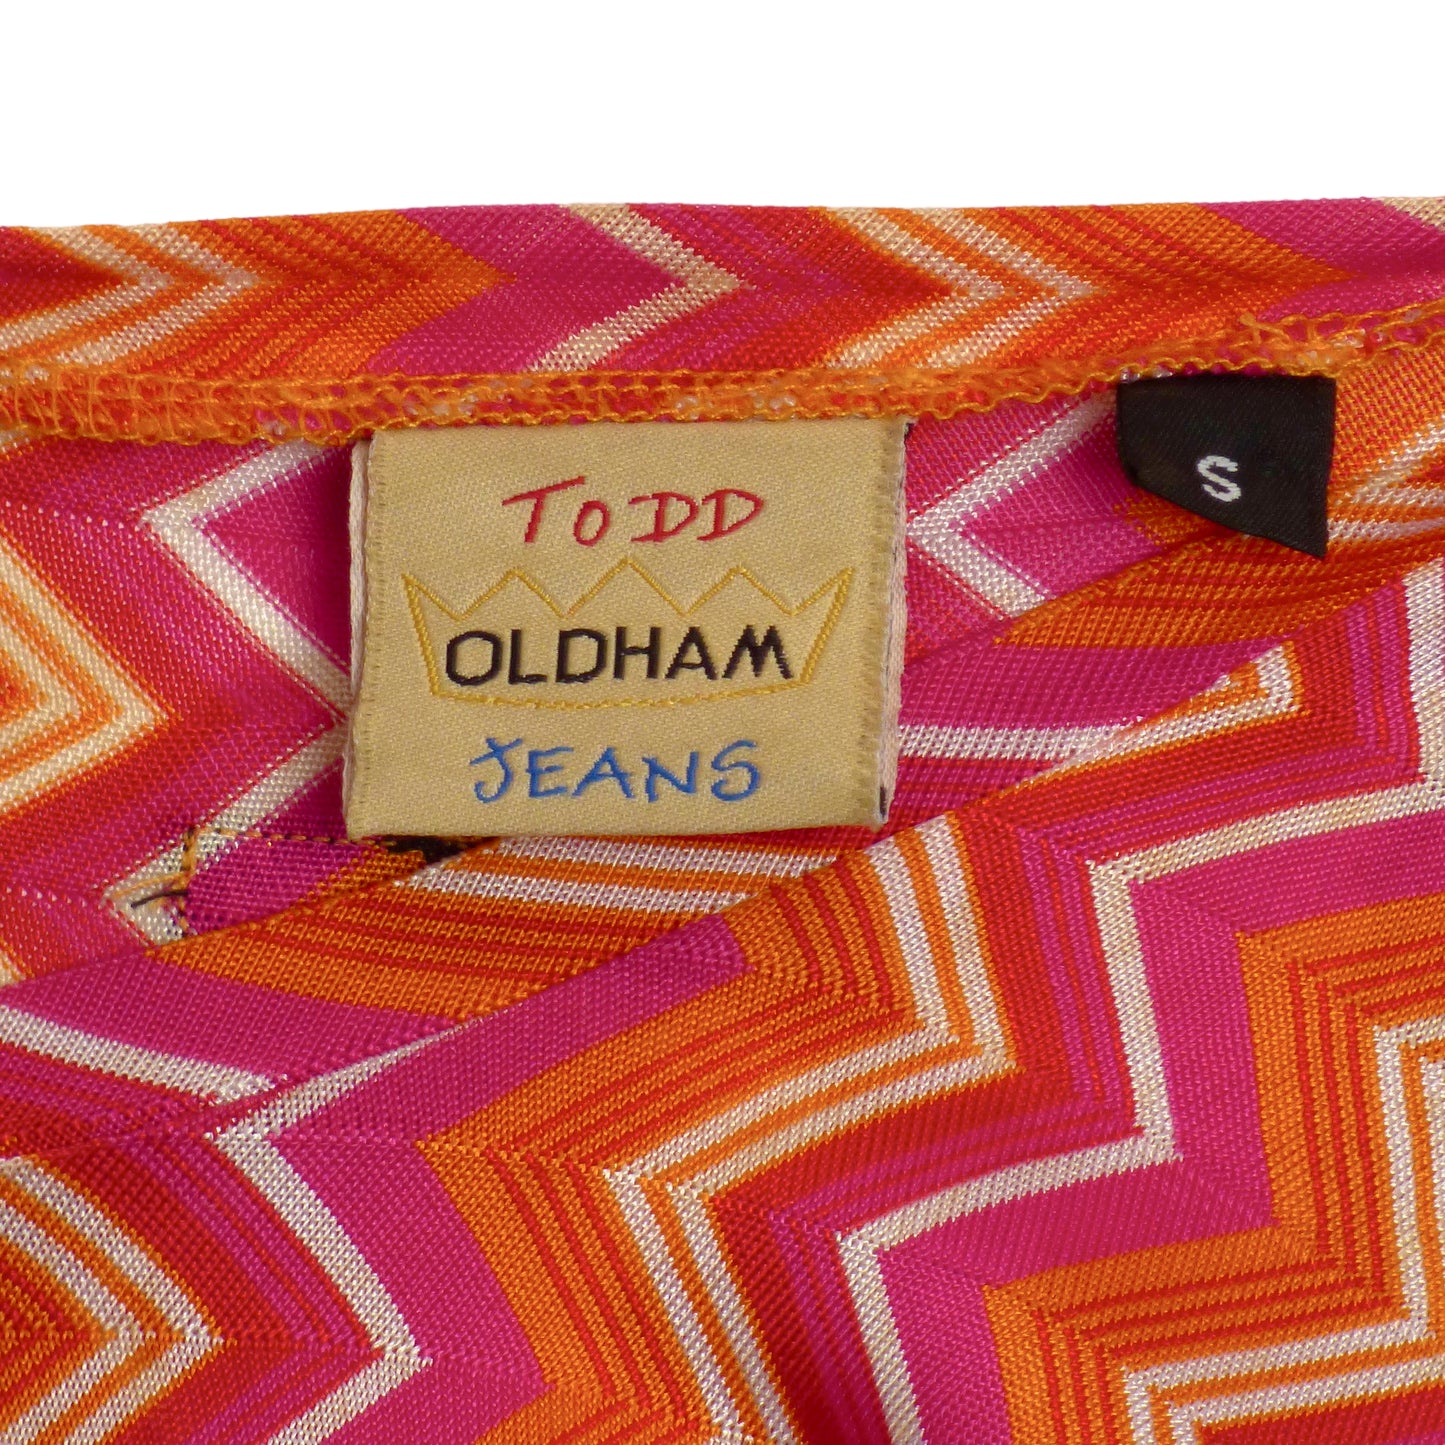 TODD OLDHAM JEANS-1990s Chevron Printed Knit Dress, Size-Small